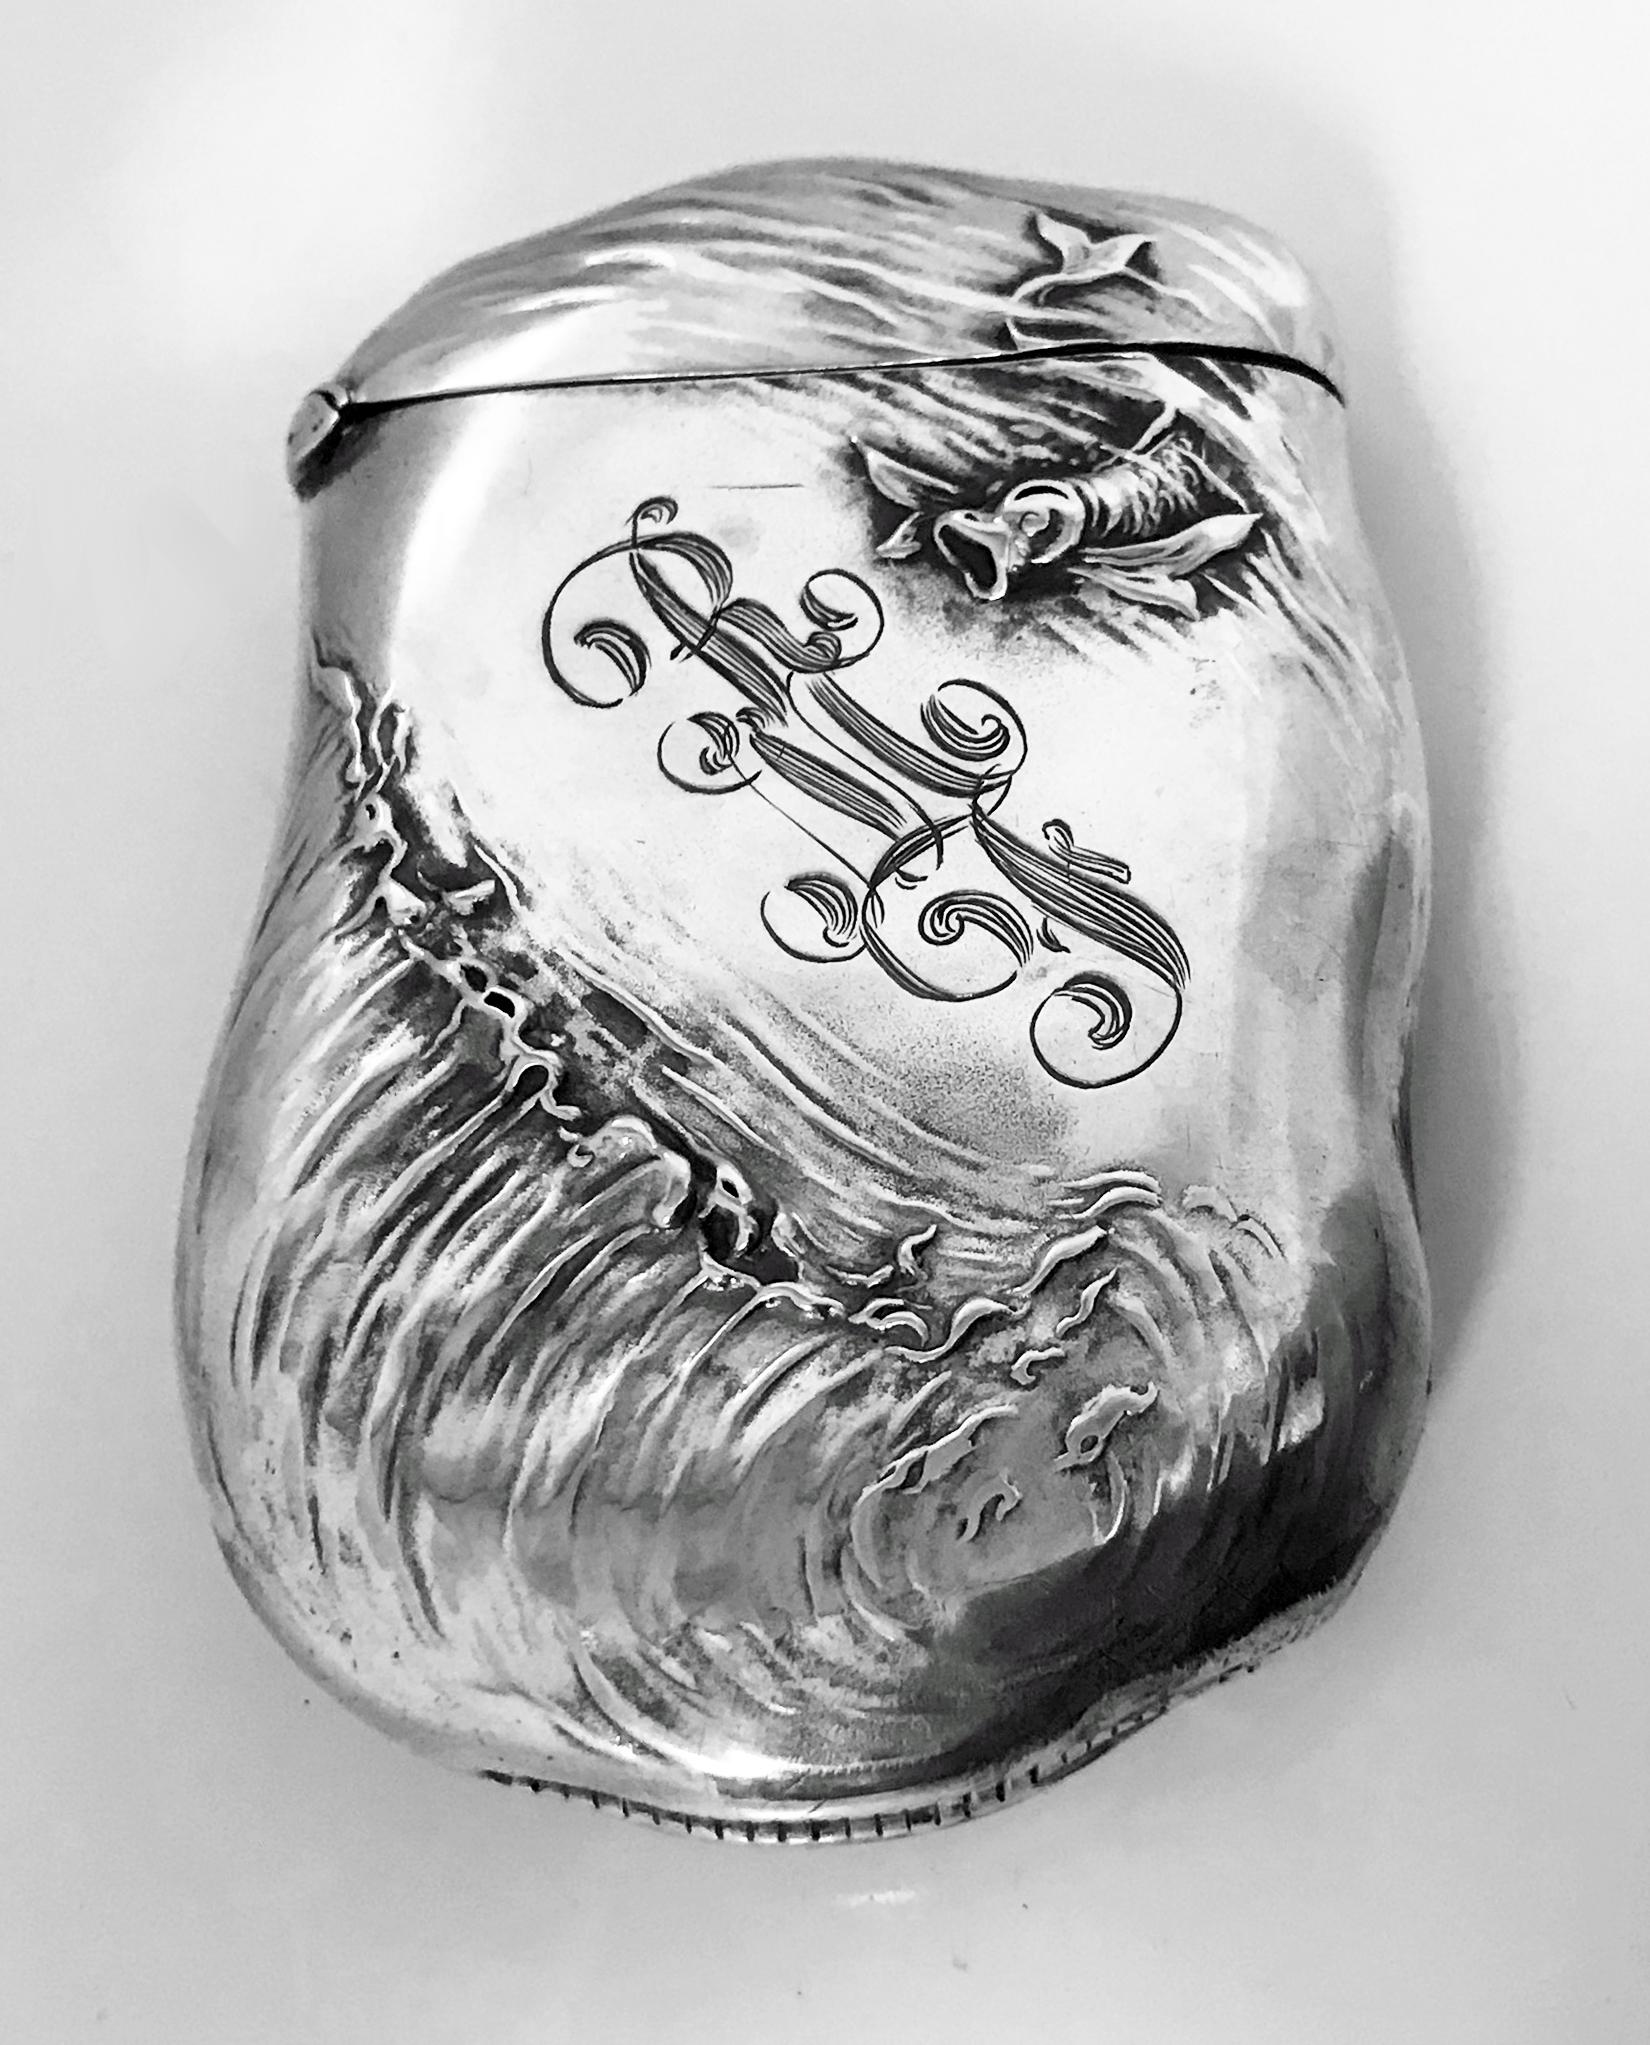 Very Fine quality Art Nouveau Sterling Silver Vesta Match Safe, William Kerr C.1900.  Repousse relief depicting as the central theme on one side, an attractive nude female being adored and pursued by a male suitors frolicking in waves with fish